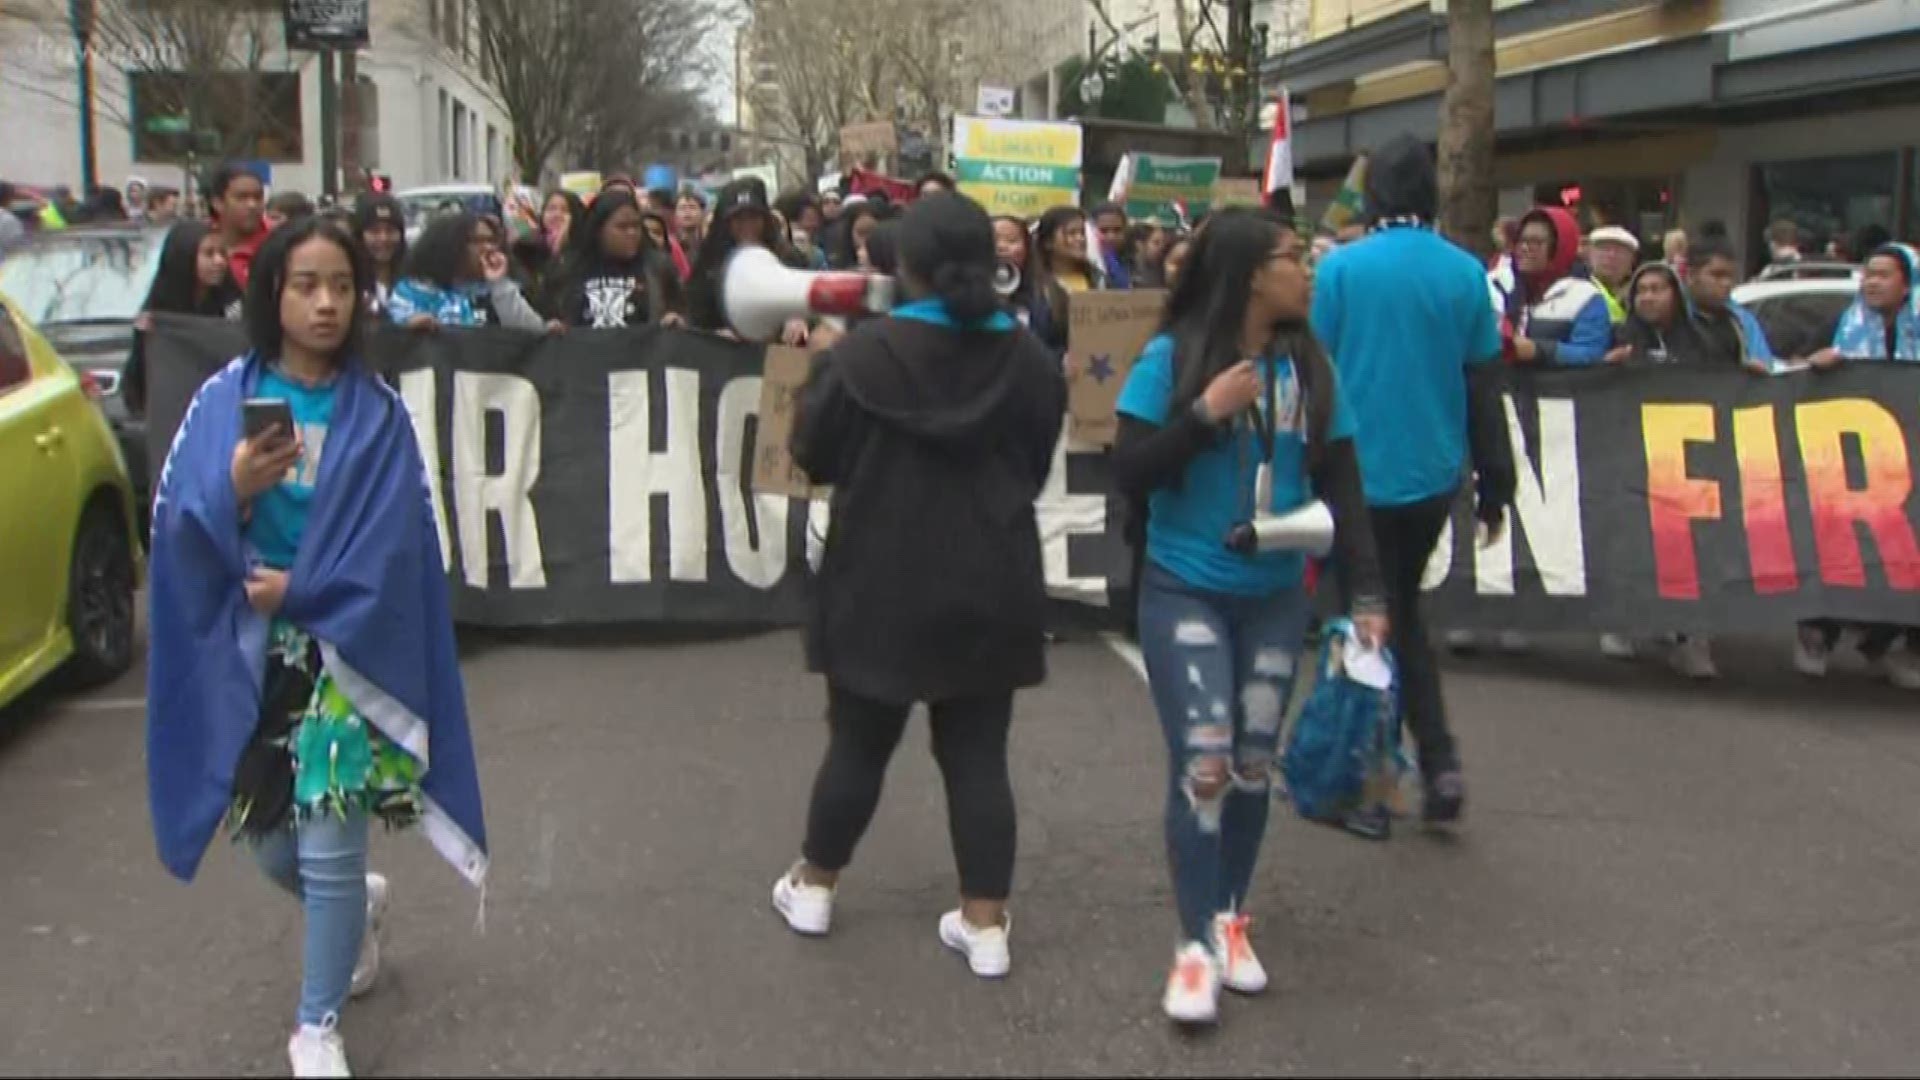 Hundreds of students and supporters marched through the streets of downtown Portland calling for climate justice.